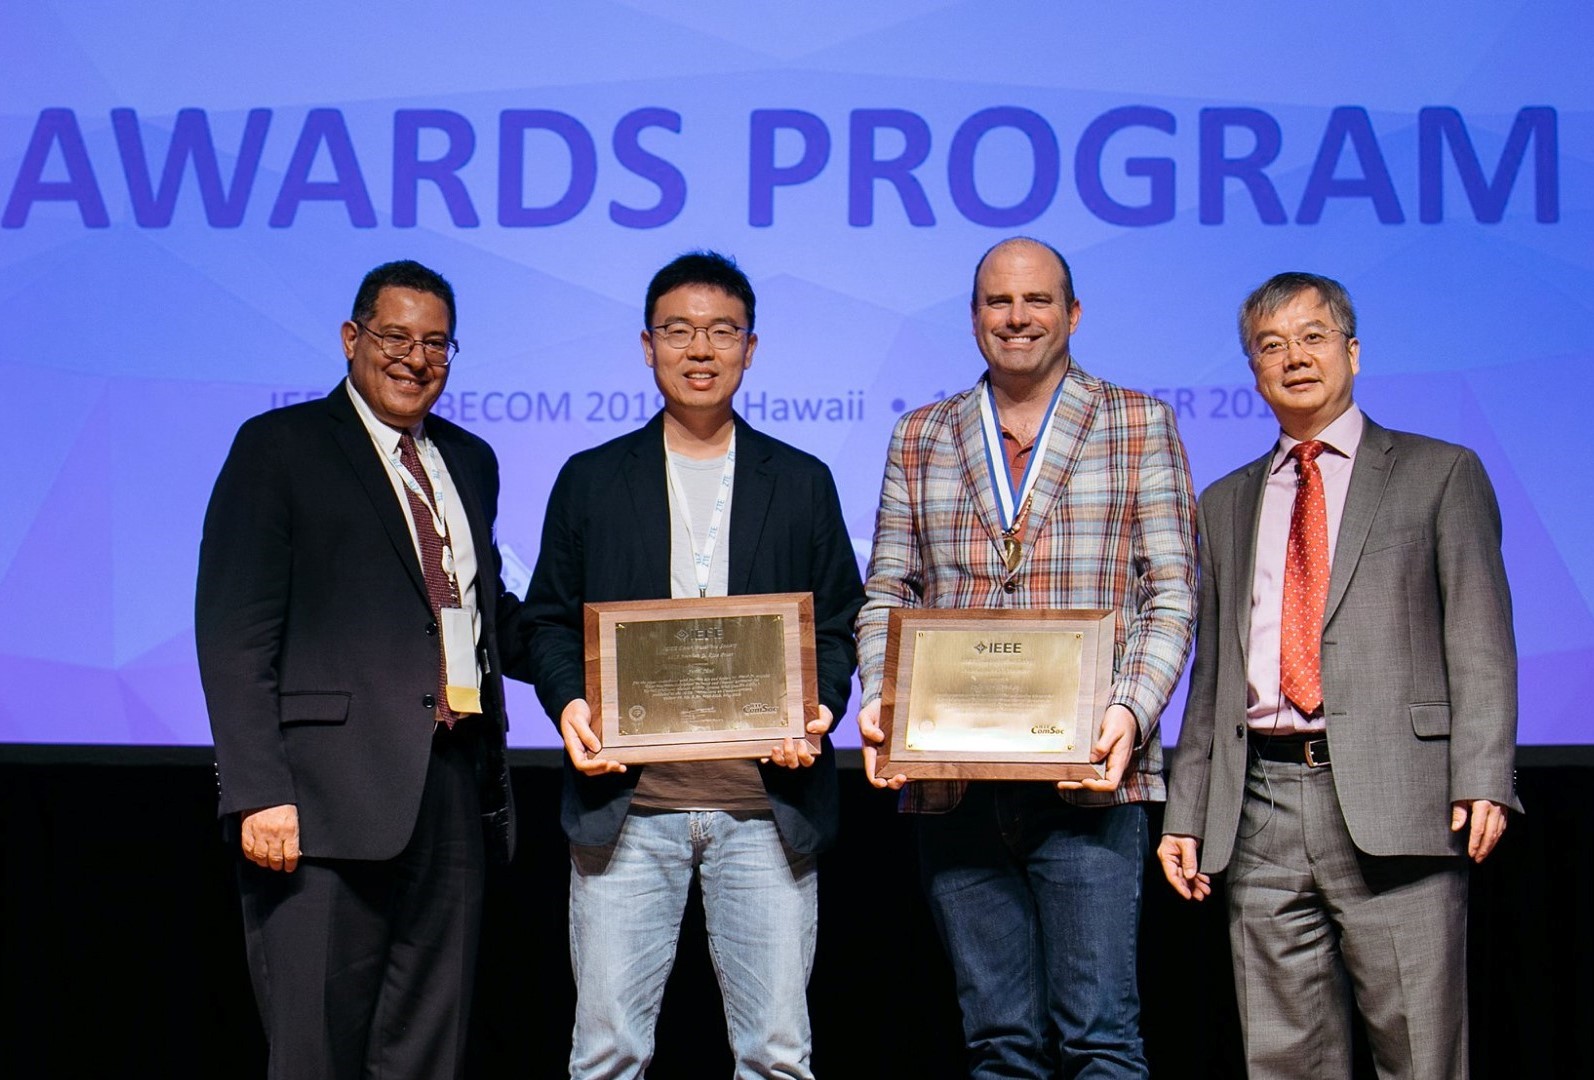 Professor Junil Choi received Haedong Young Engineering Researcher Award and Communications Society Stephen O. Rice Prize